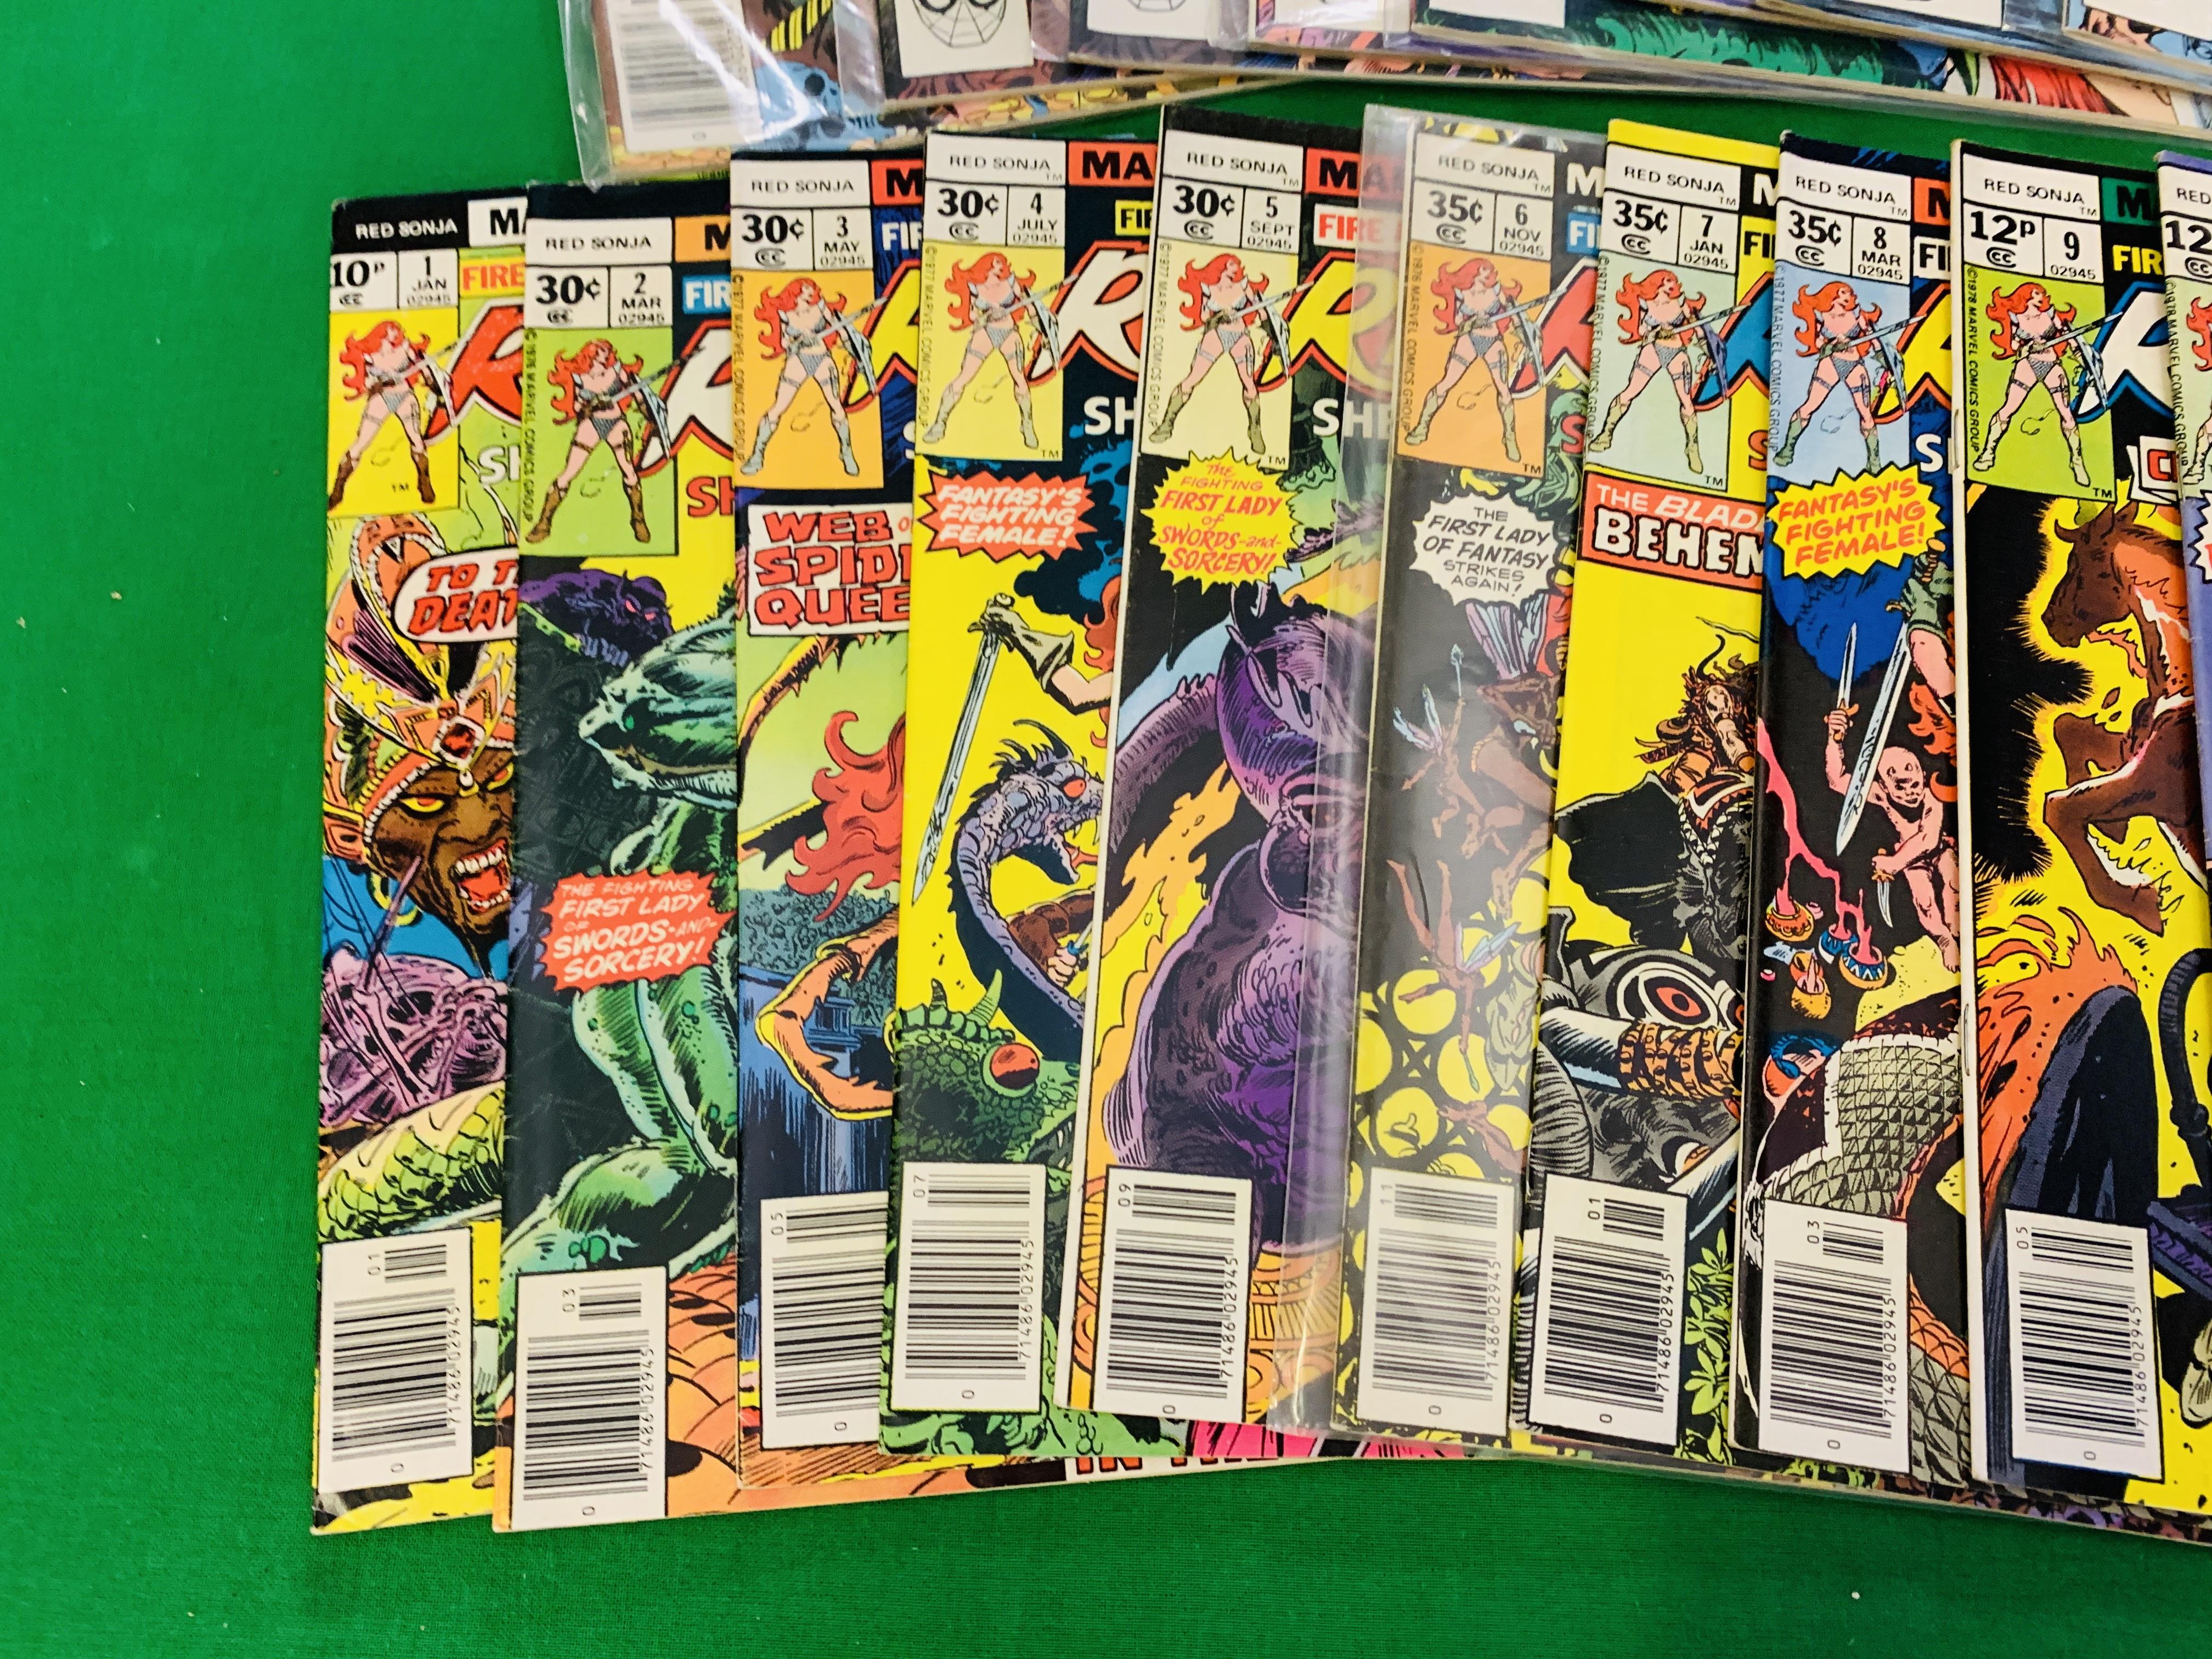 MARVEL COMICS RED SONJA NO. 1 - 15 FROM 1977 AND NO. 1 - 13 FROM 1983, INCLUDING OTHER APPEARANCES. - Image 2 of 8